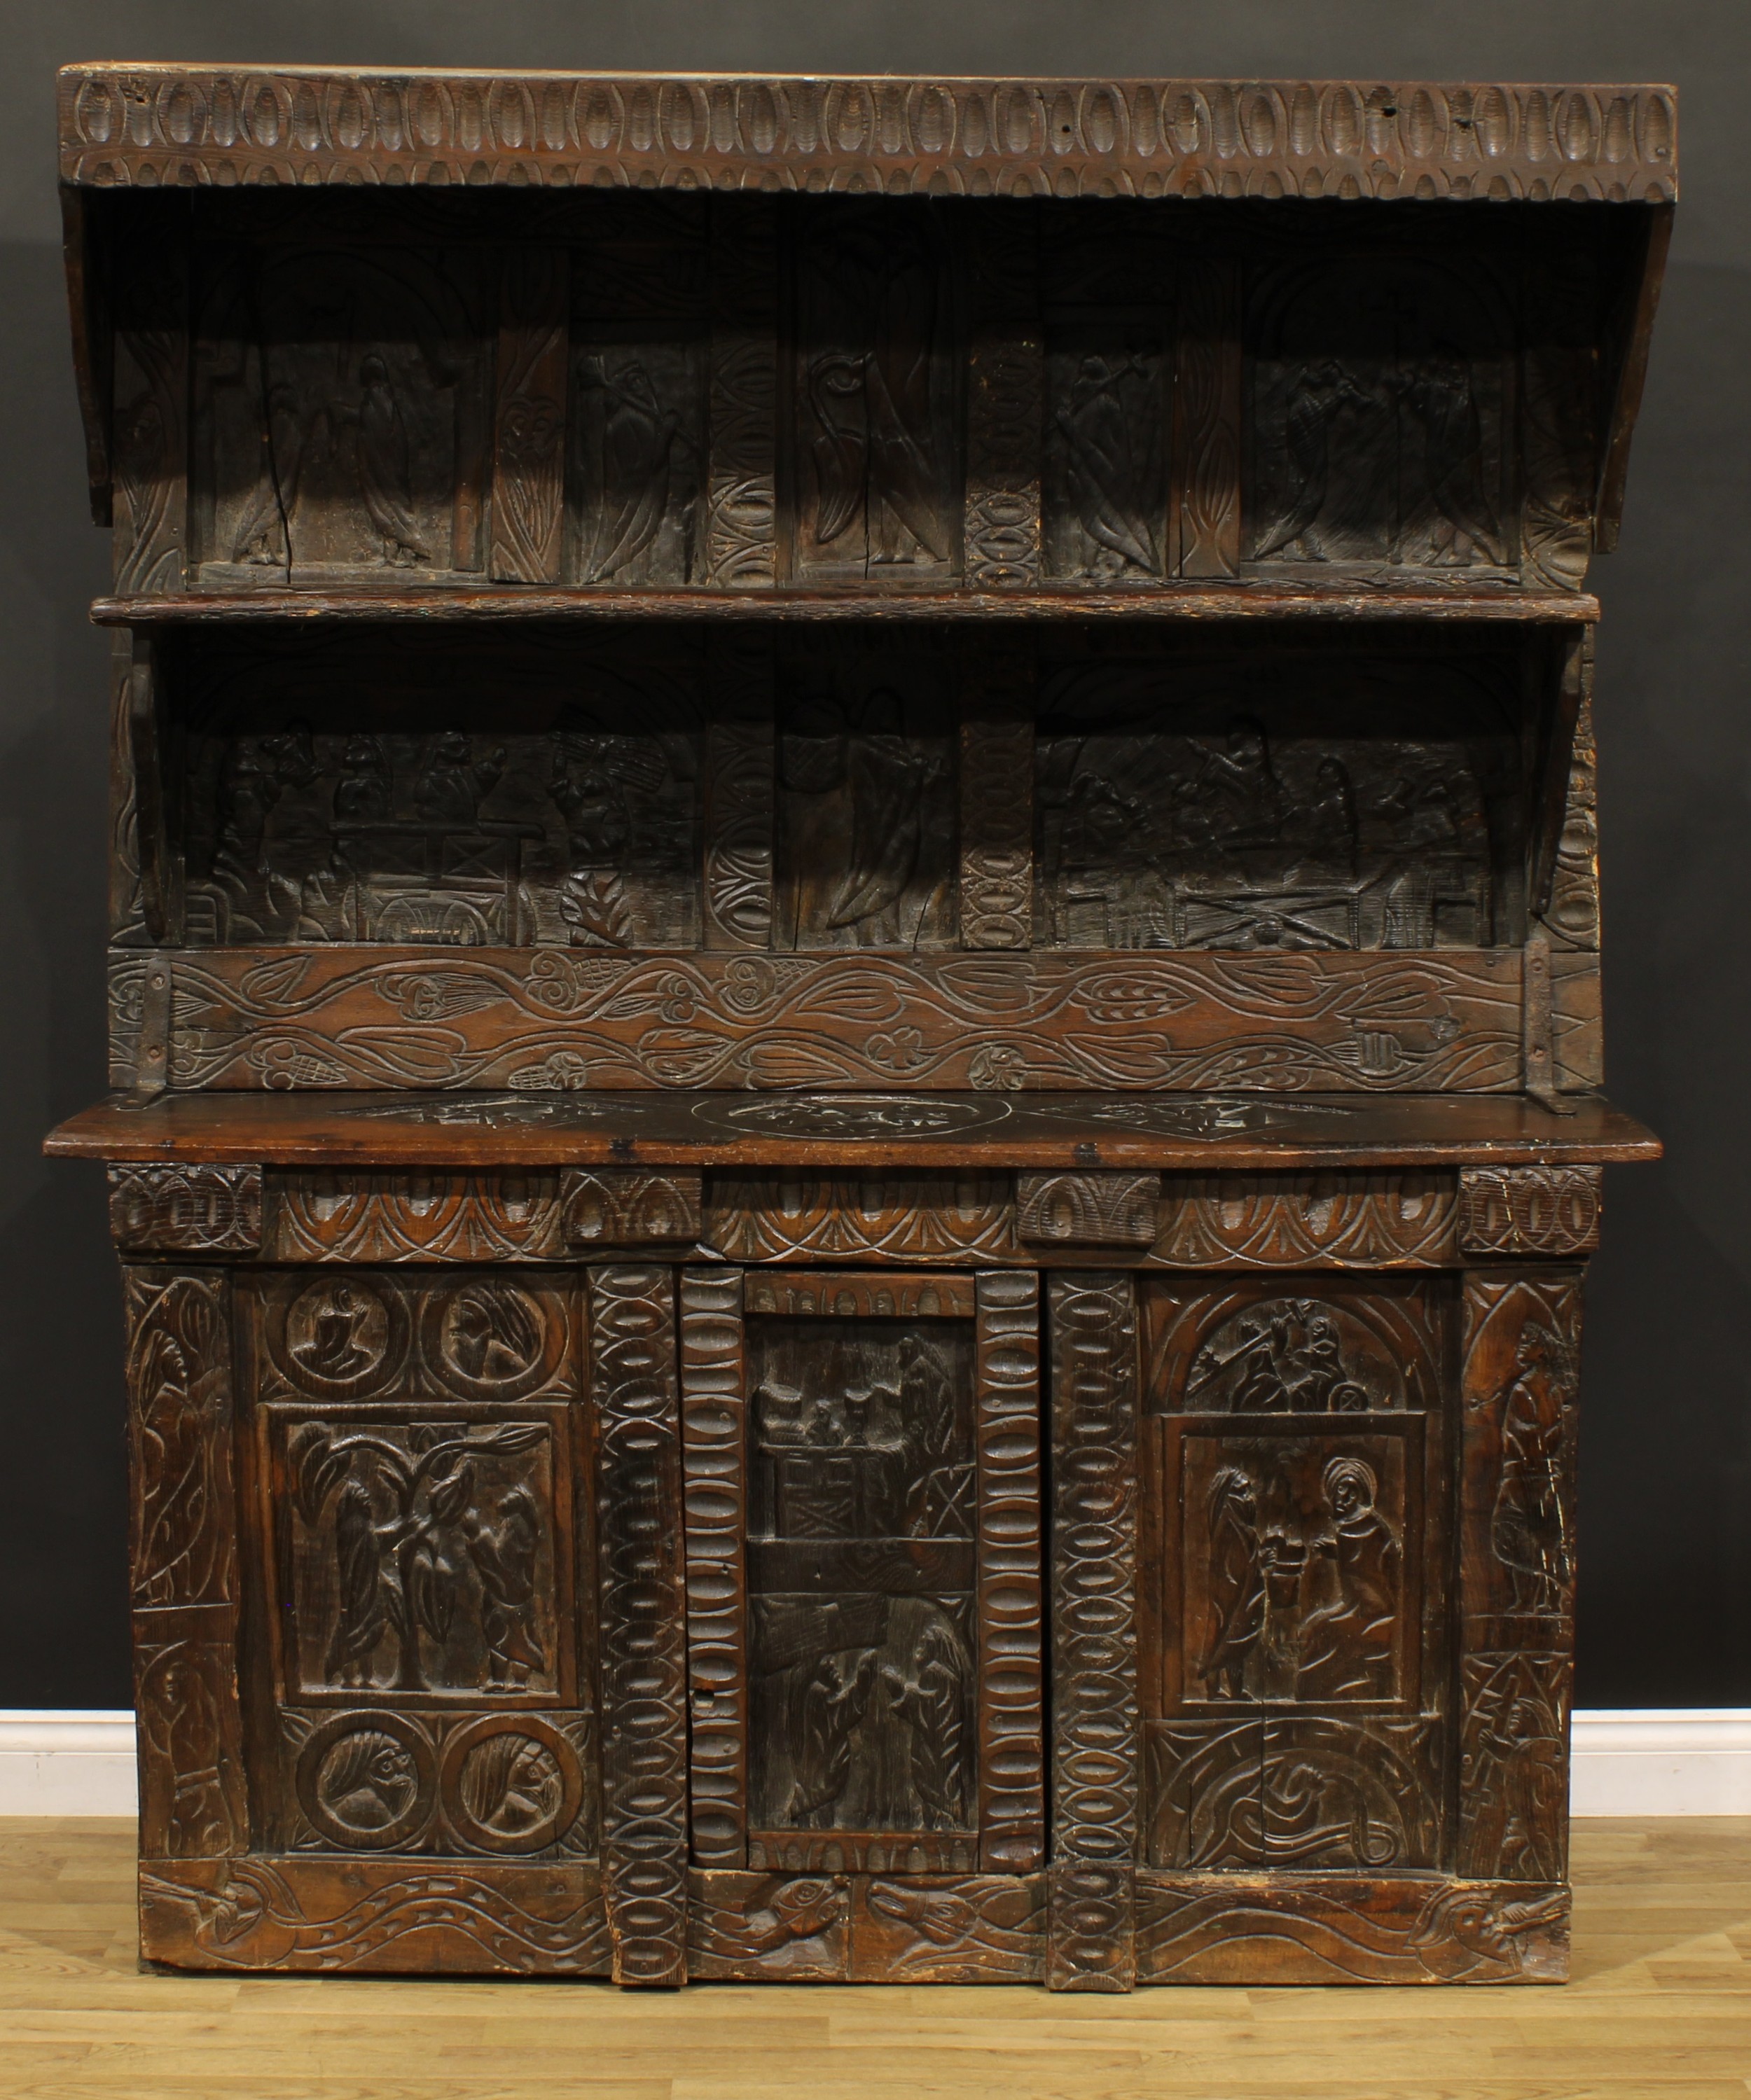 A 17th century style ecclesiastical Historicist Revival oak dresser or side cabinet, carved - Image 2 of 4